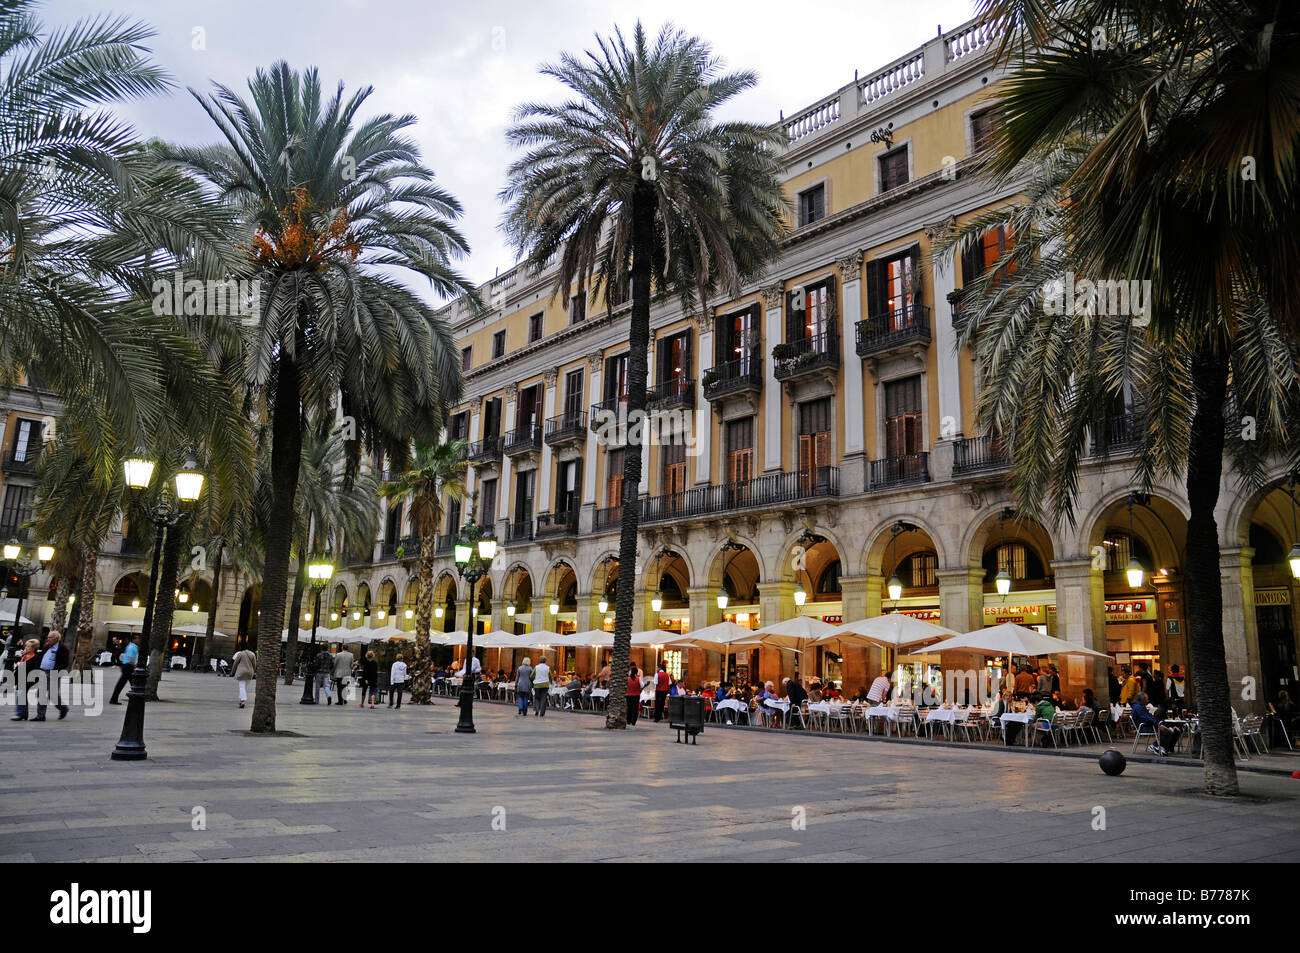 Placa Reial Square, people, palm trees, restaurant, outdoor cafe, dusk, evening, Barcelona, Catalonia, Spain, Europe Stock Photo